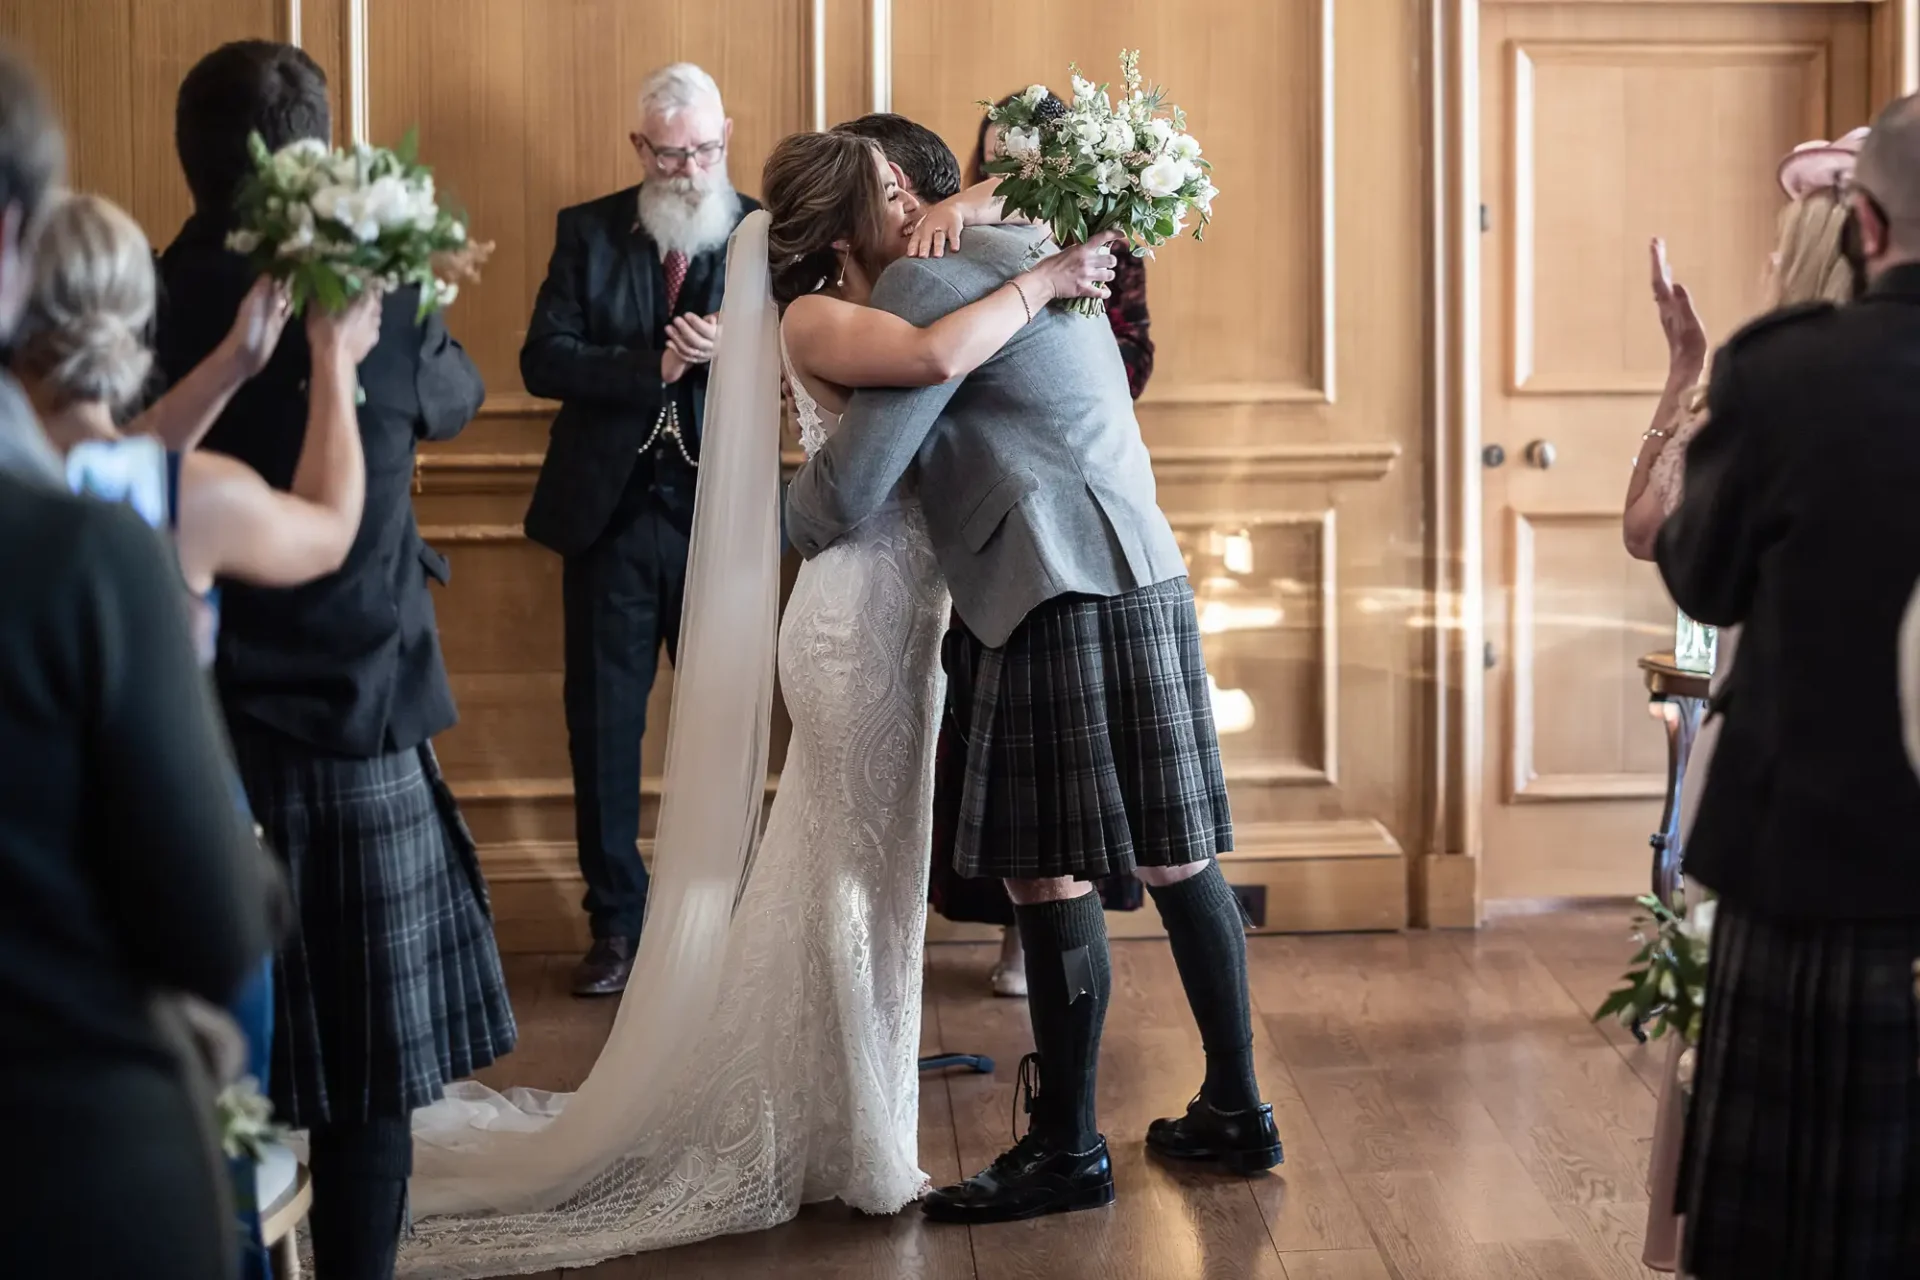 A bride and groom embrace at their wedding ceremony while guests applaud, with the groom wearing a kilt and the bride in a lace gown.